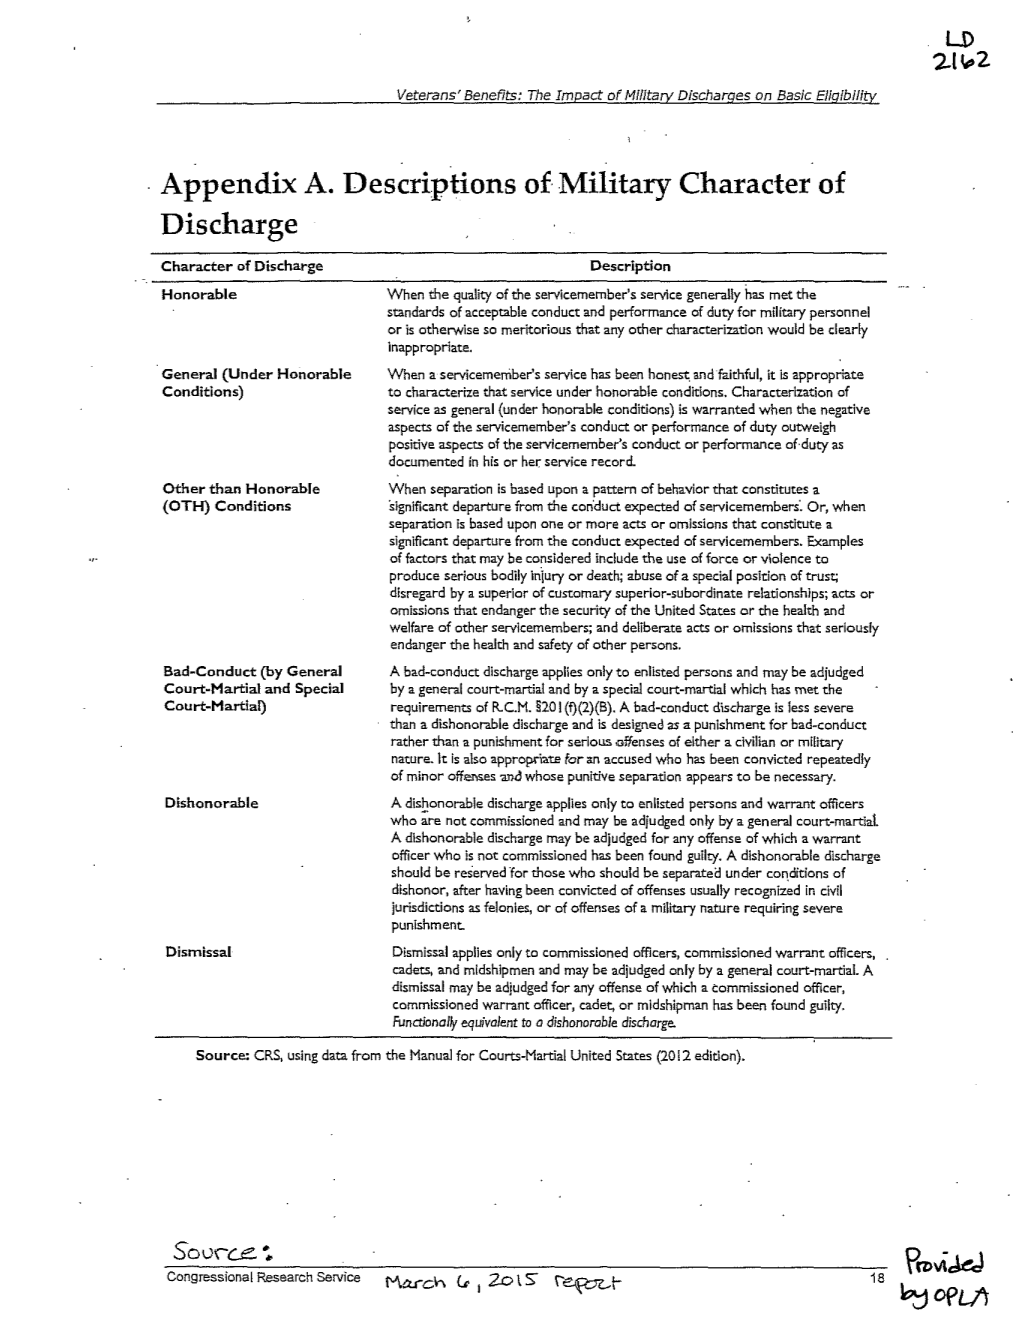 Appendix A. Descriptions of Military Character of Discharge